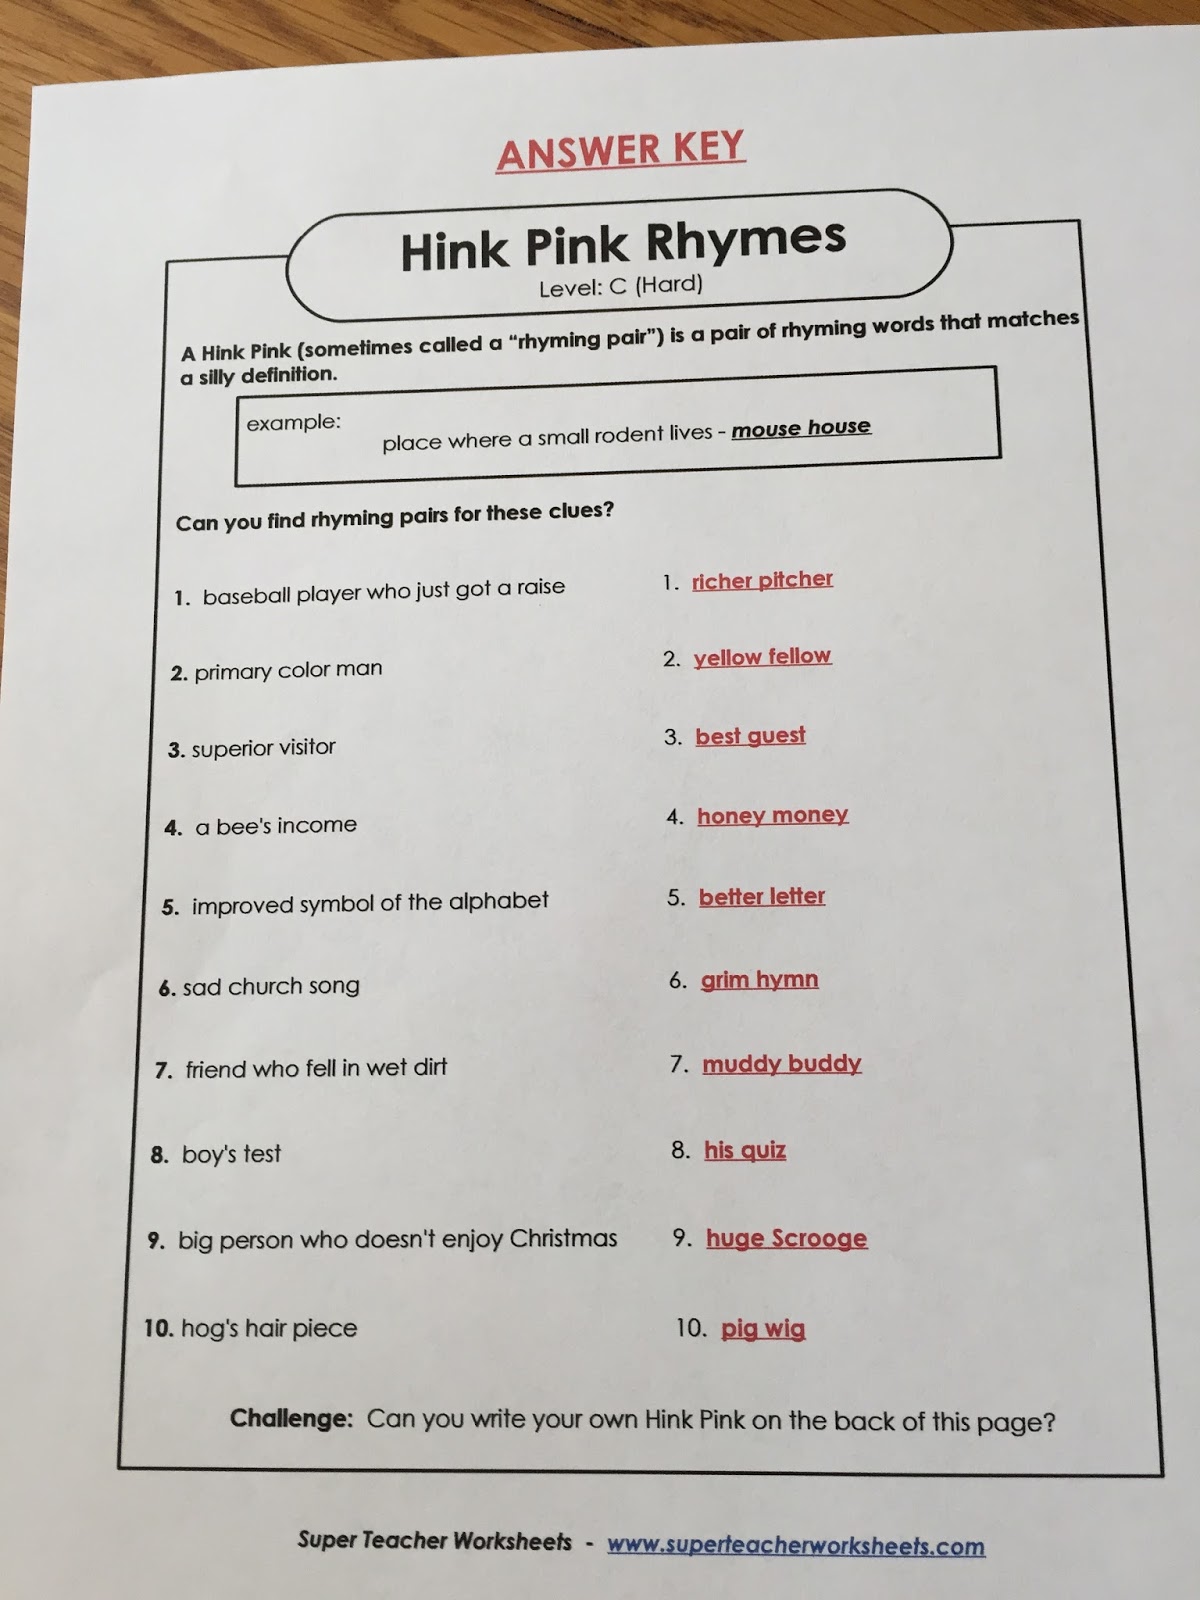 all-in-a-day-s-work-worksheet-answer-key